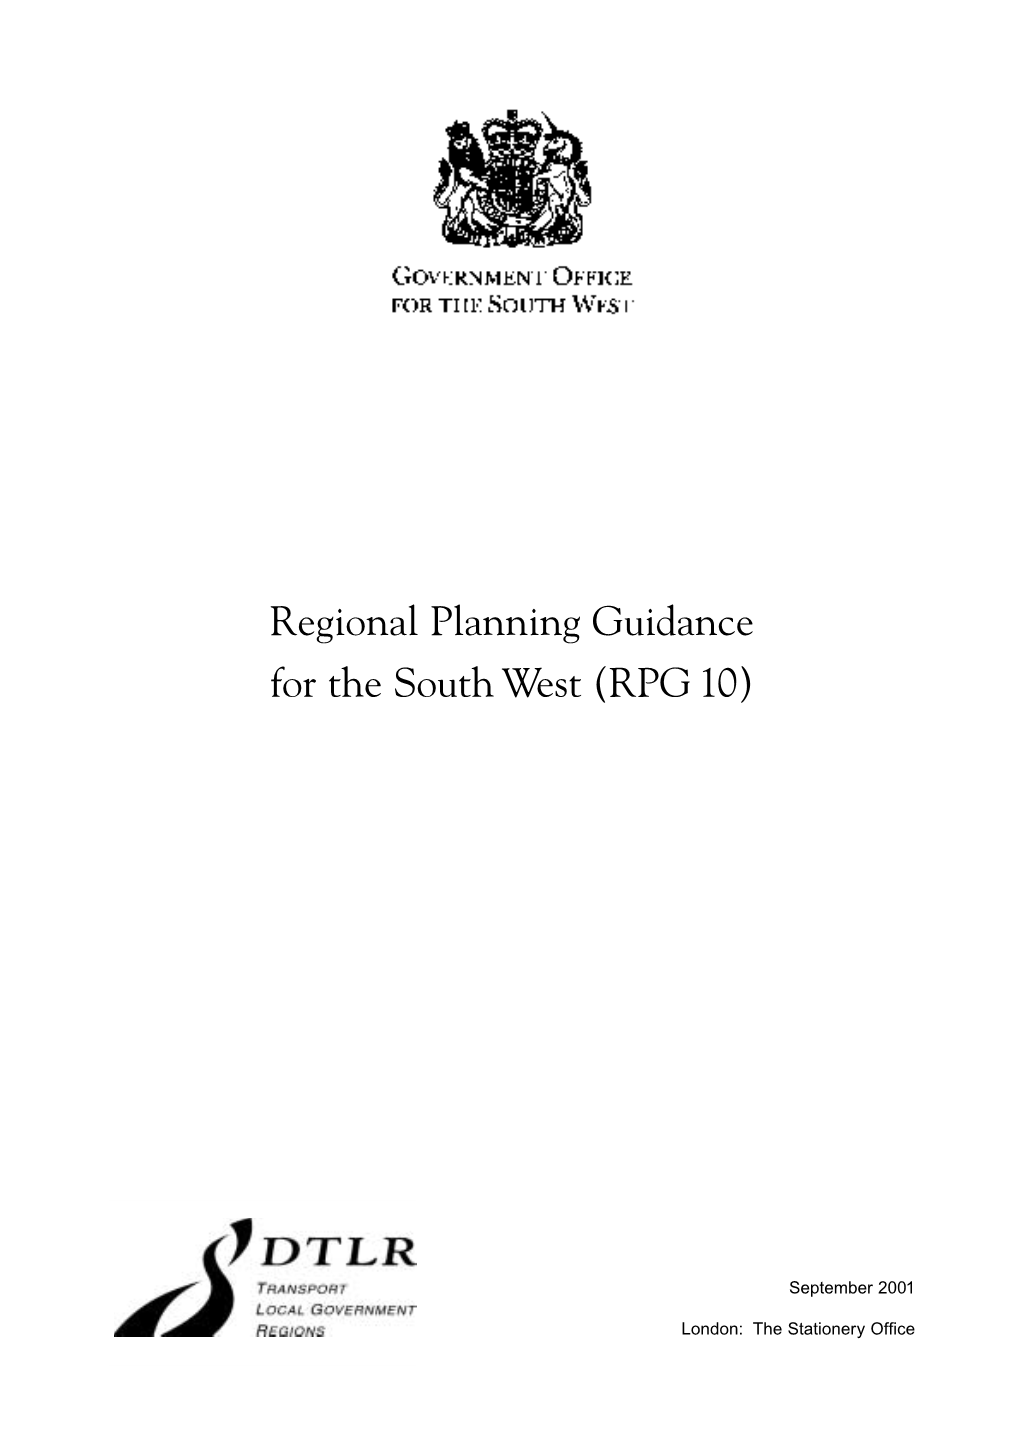 Regional Planning Guidance for the South West (RPG10)